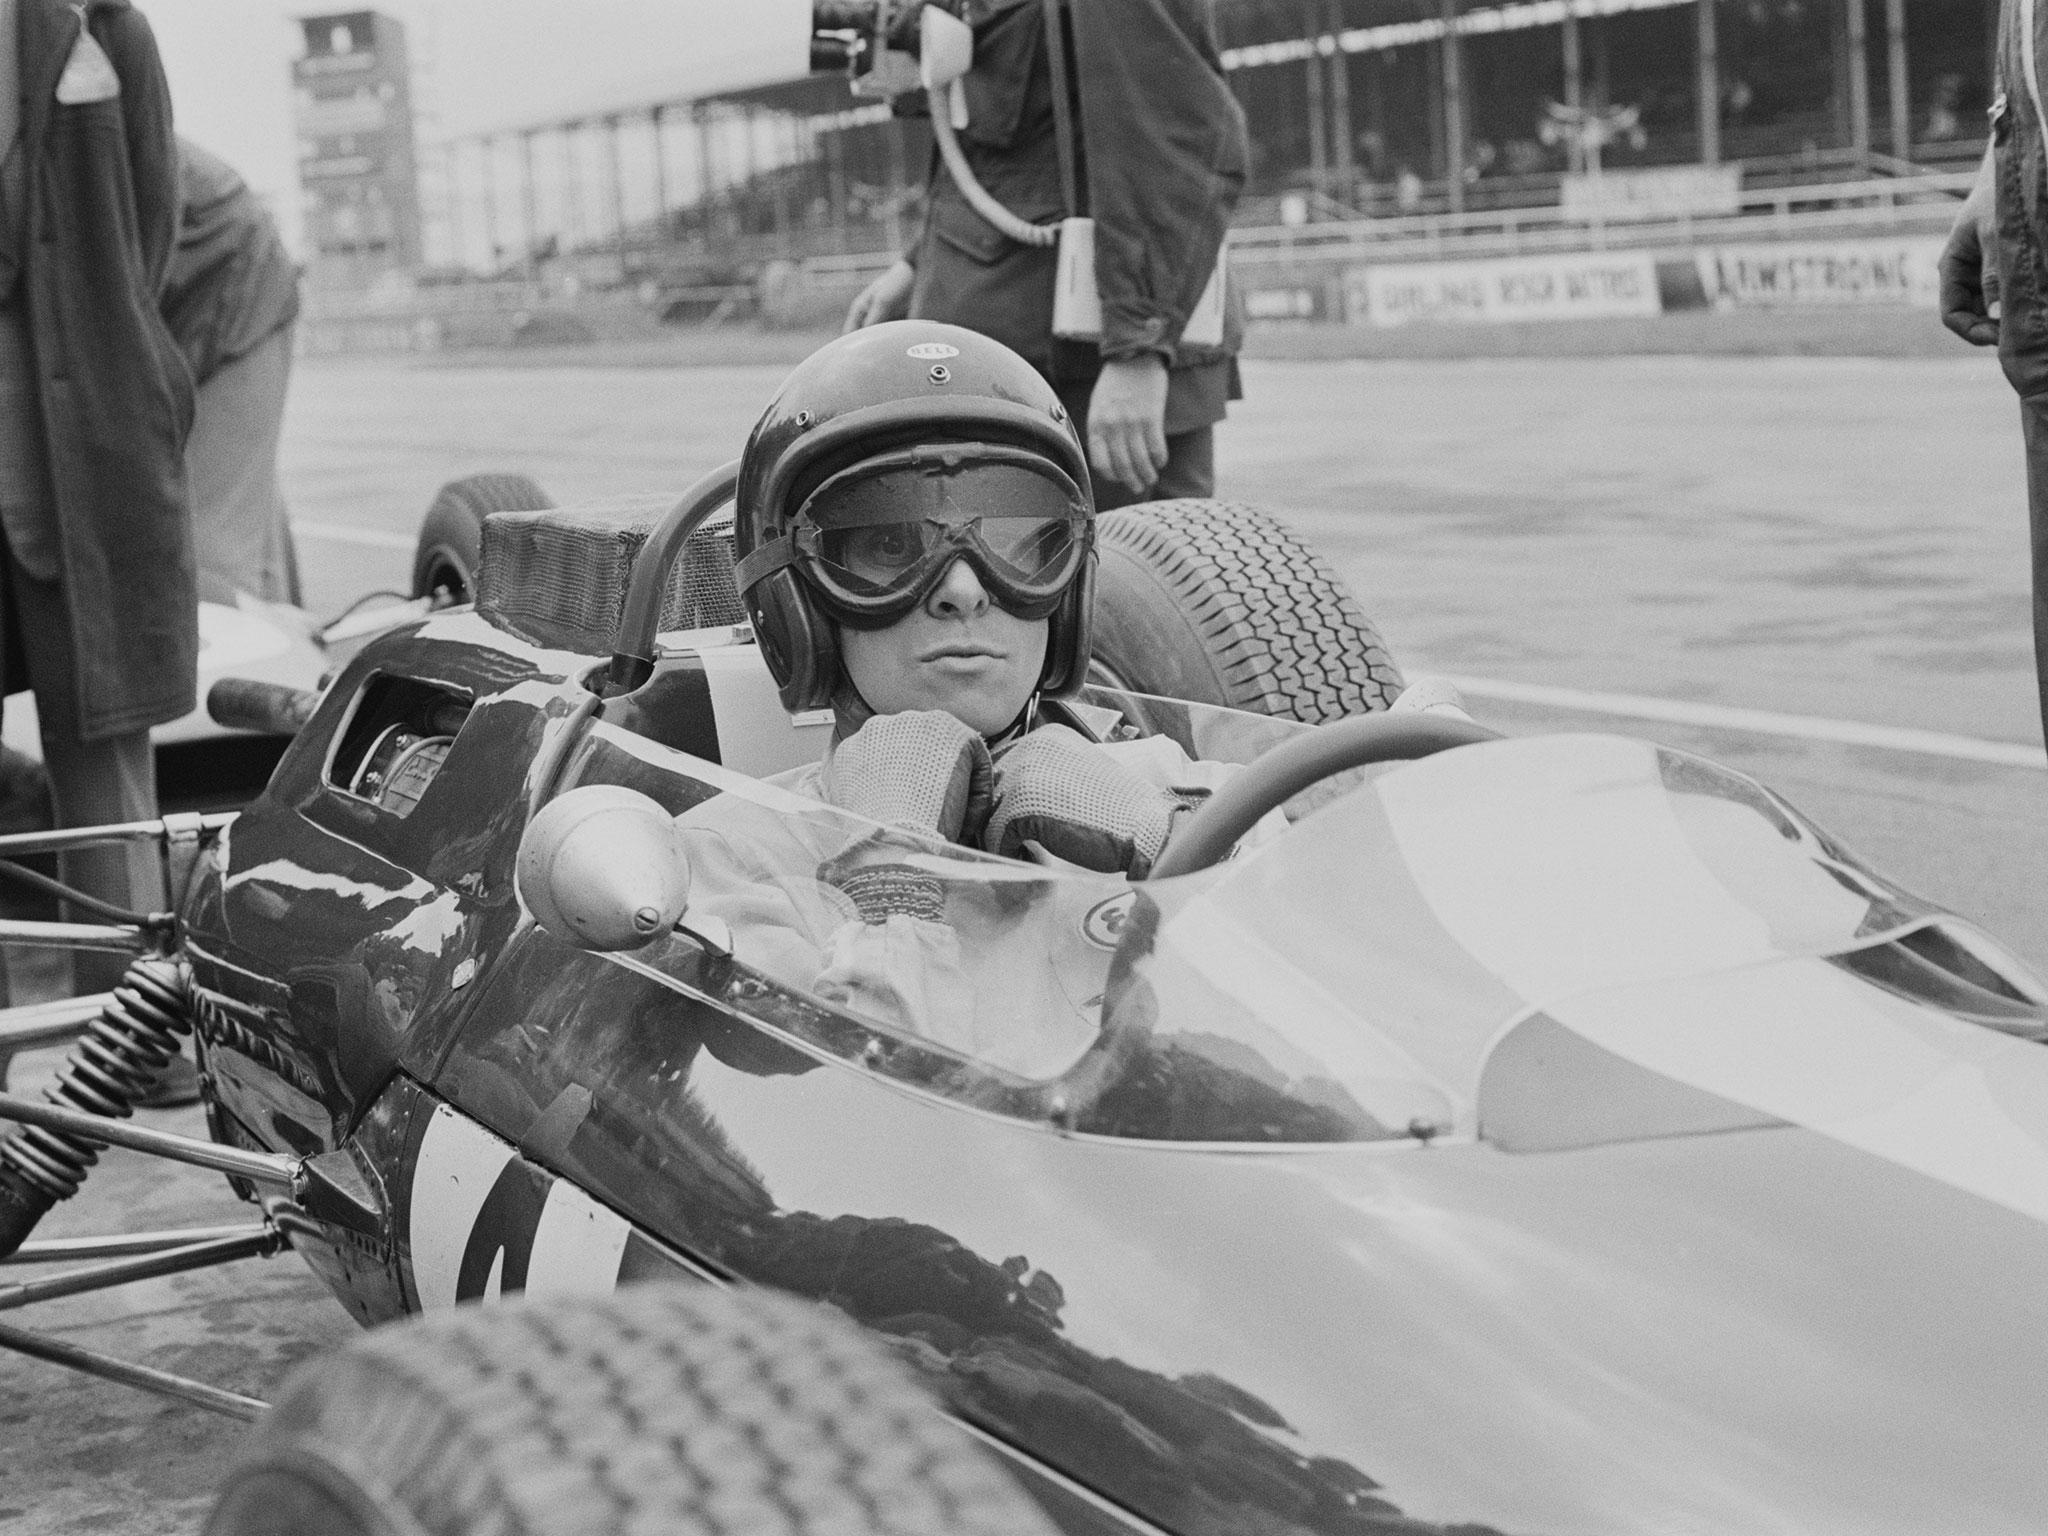 Jim Clark became the greatest driver of his time, the man by whom others judged themselves